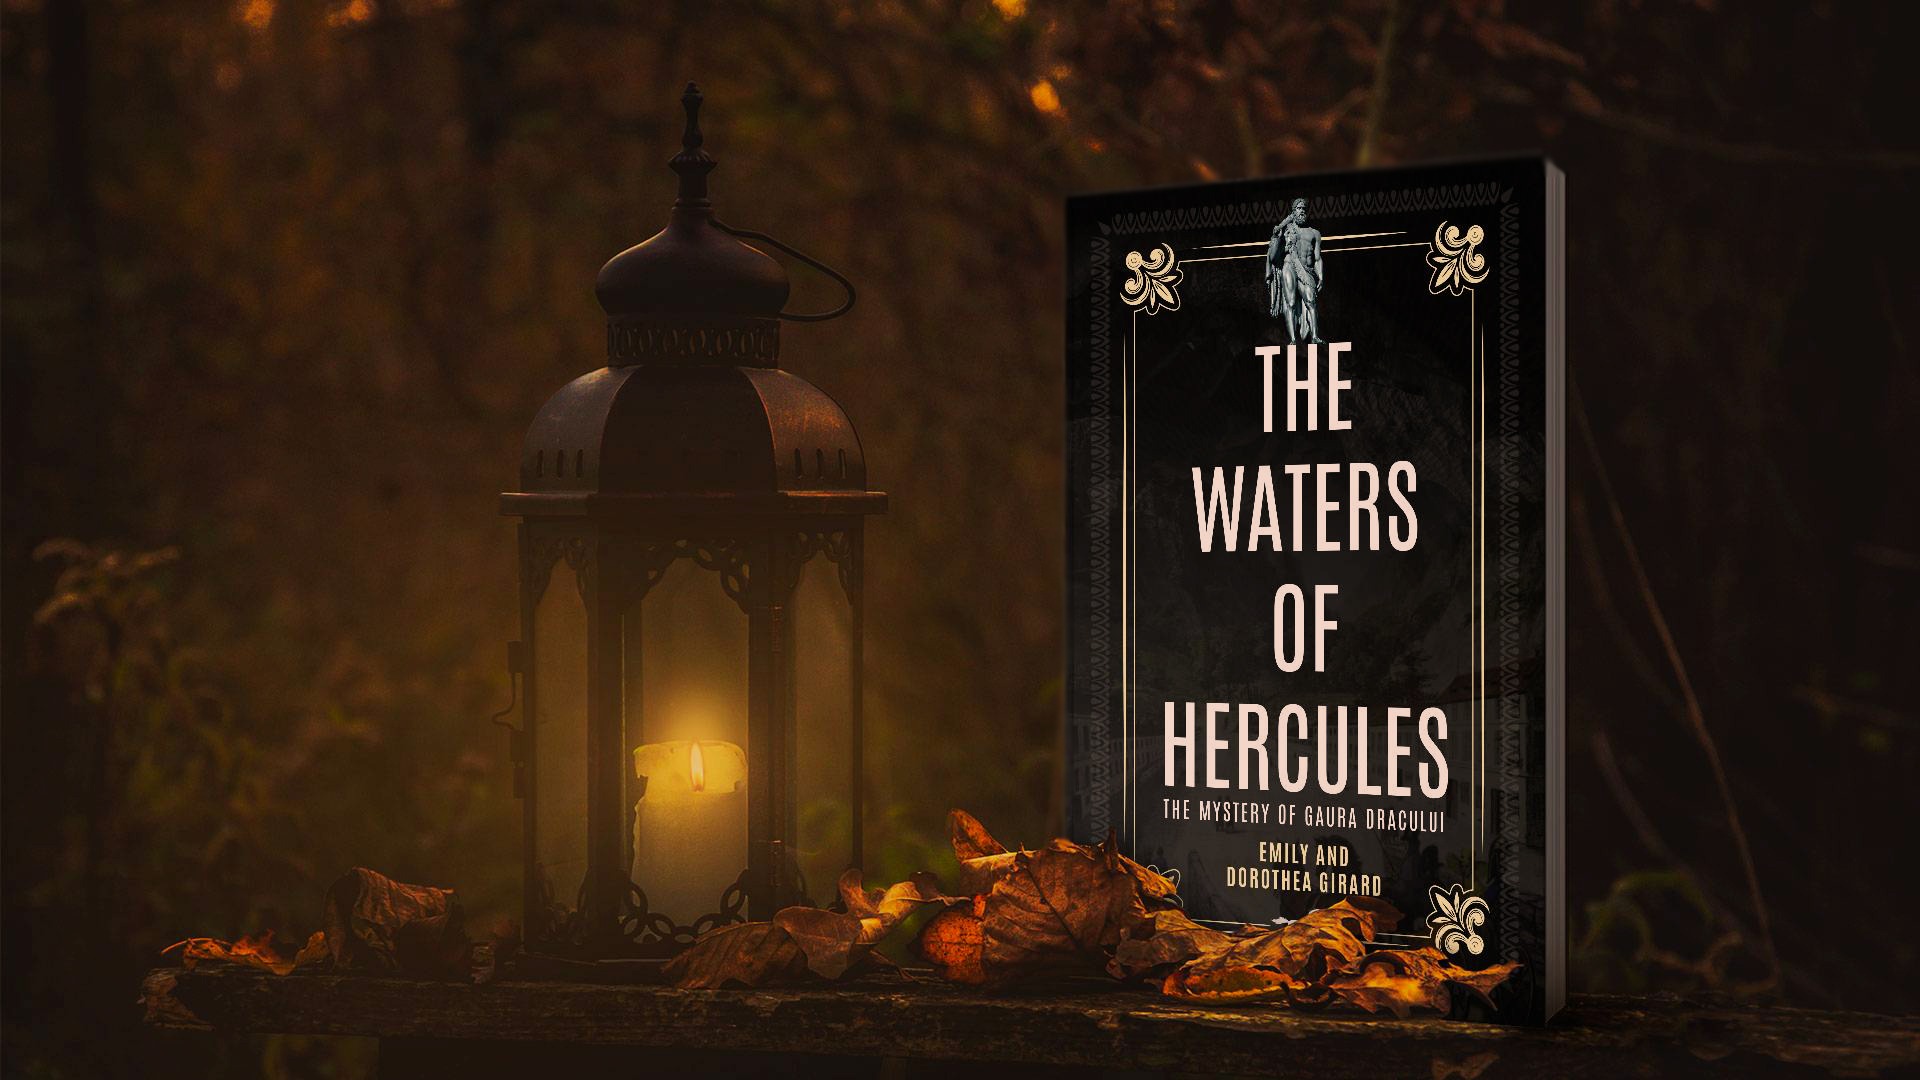 Histria Books announces the release of The Waters of Hercules